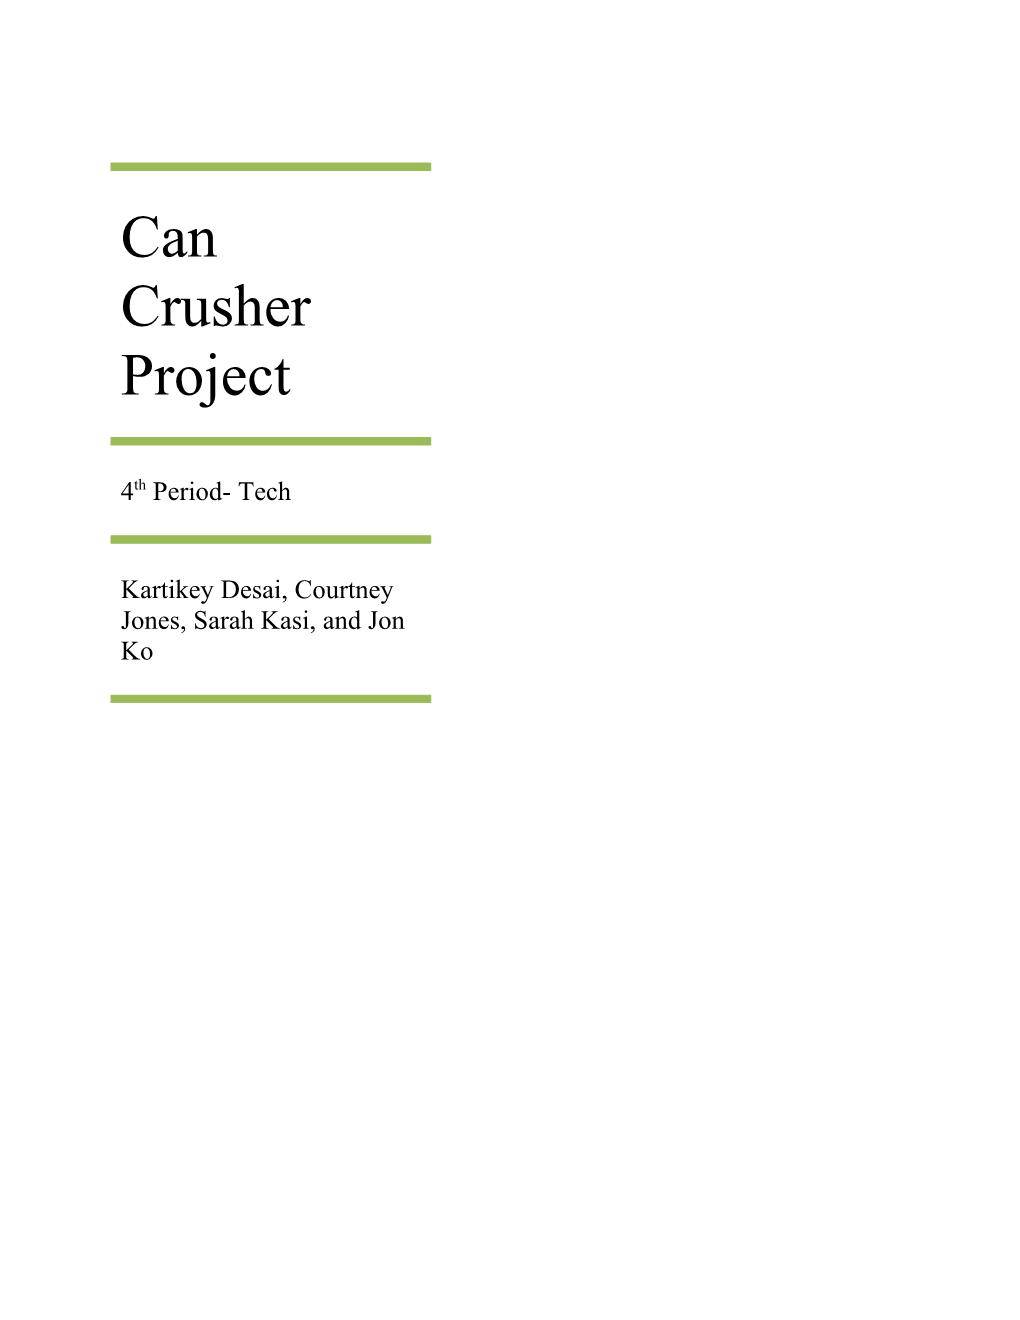 Can Crusher Project